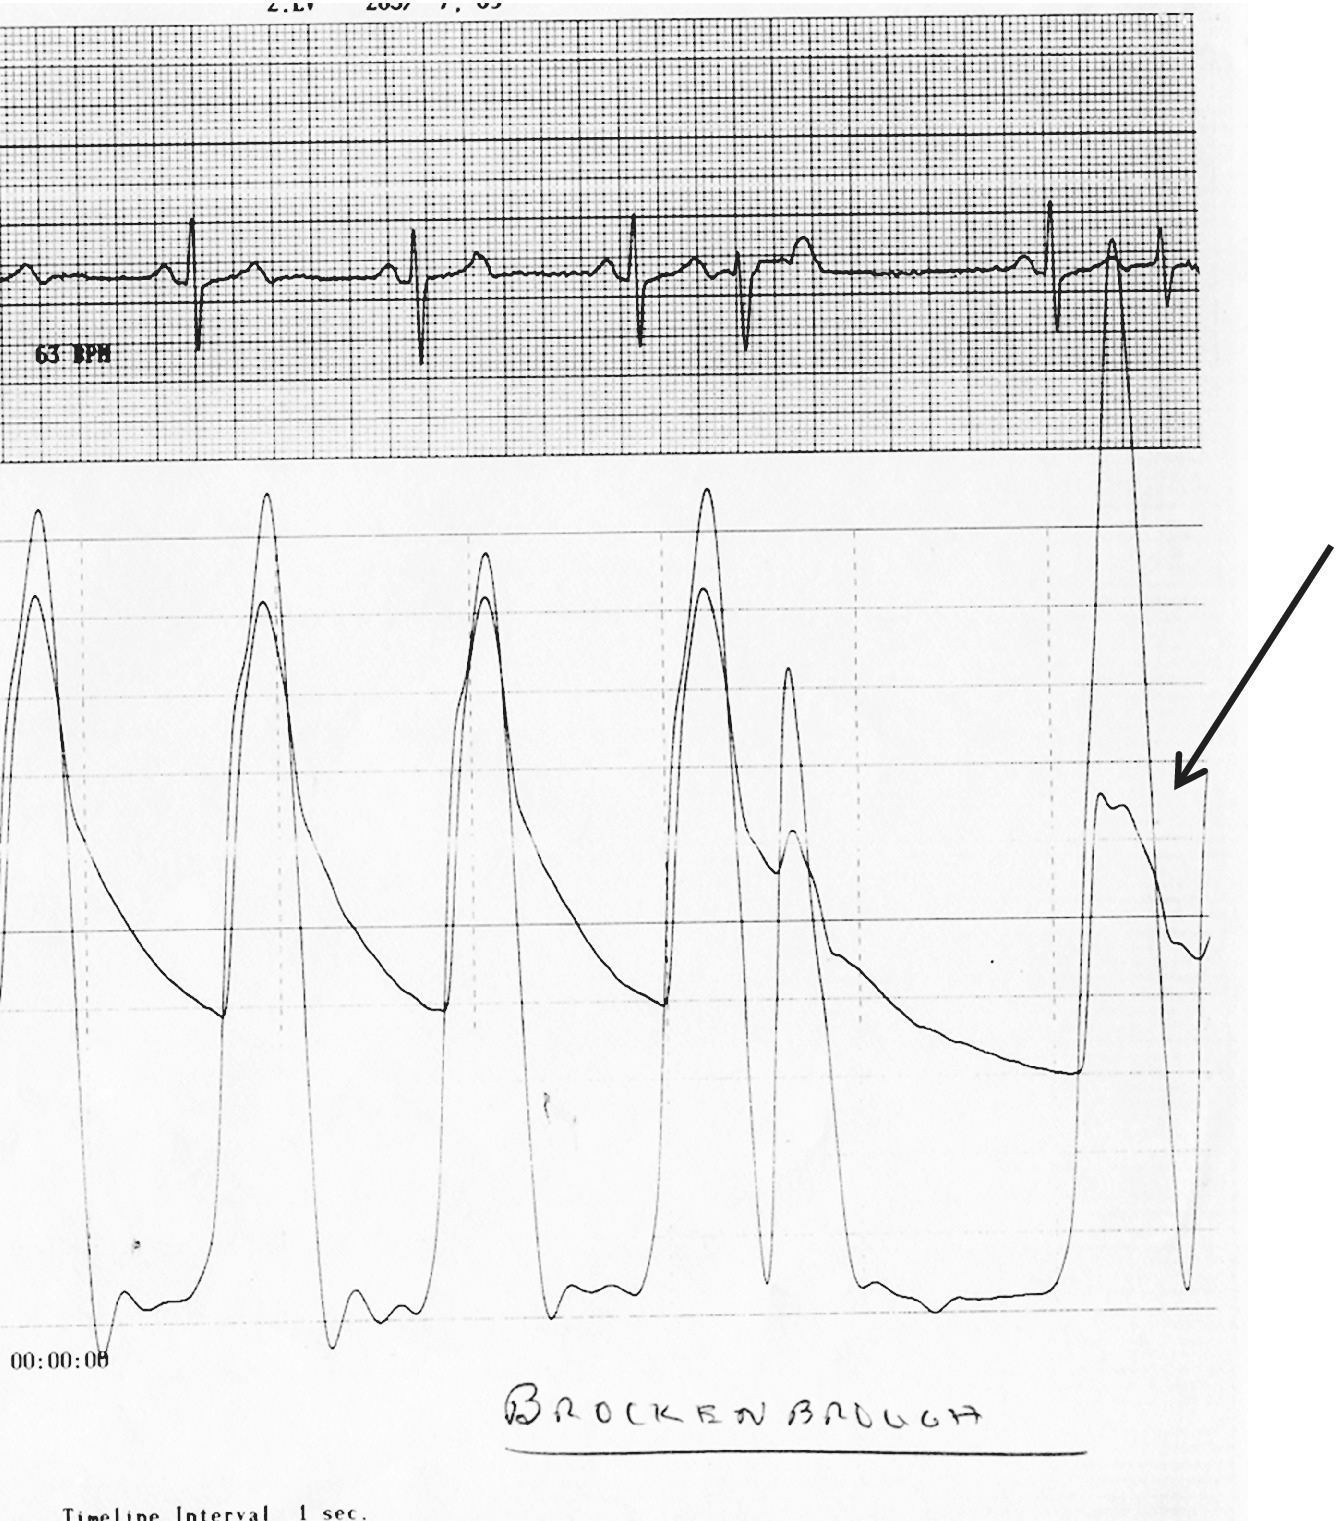 ECG of Brockenbrough–Braunwald–Morrow sign displaying pulse pressure falling in the first normal beat post-PVC depicted by an arrow in HOCM.